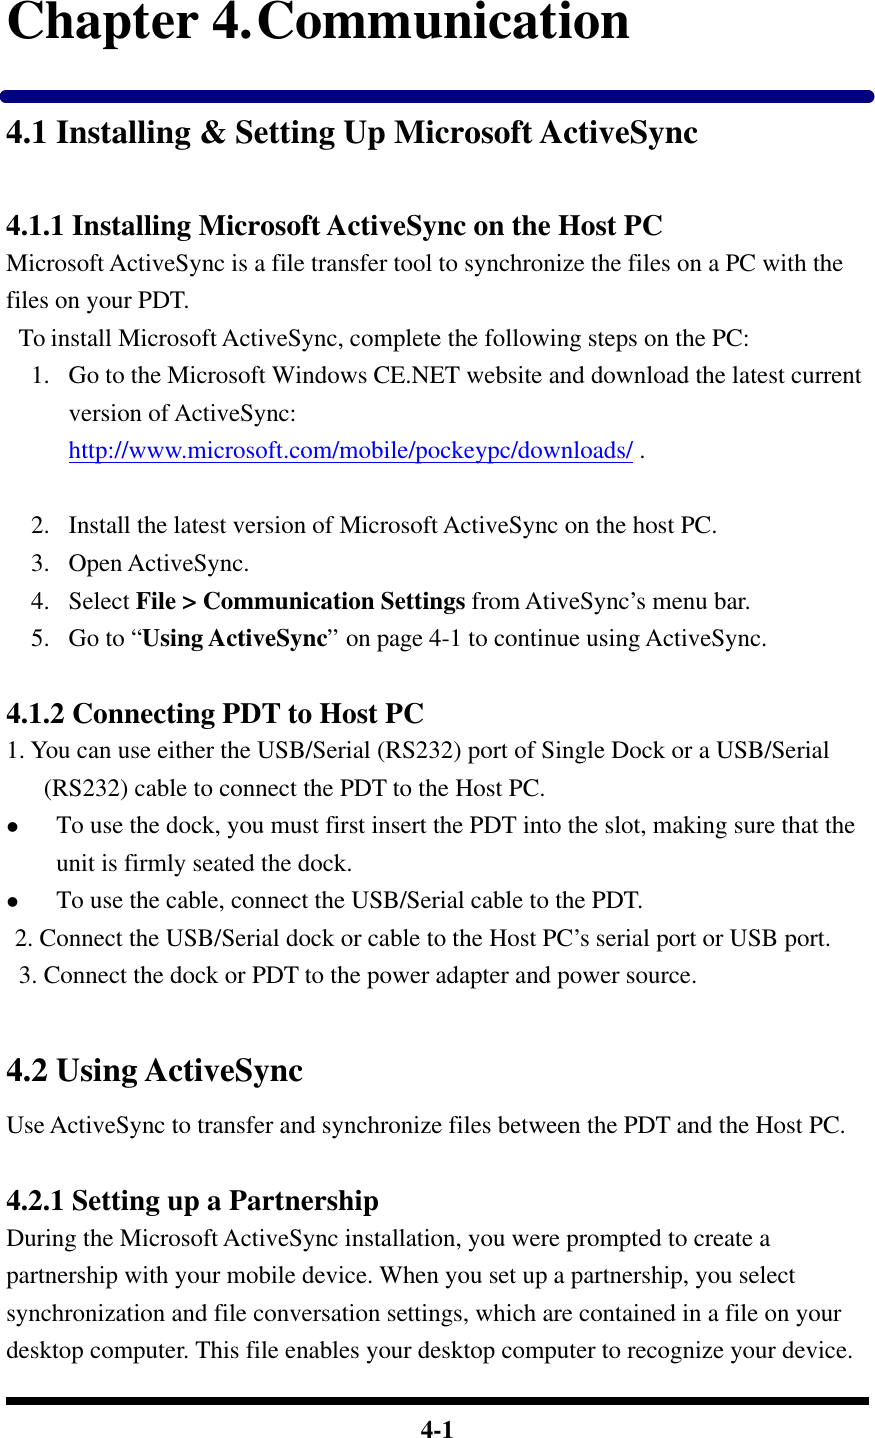  4-1 Chapter 4. Communication 4.1 Installing &amp; Setting Up Microsoft ActiveSync  4.1.1 Installing Microsoft ActiveSync on the Host PC Microsoft ActiveSync is a file transfer tool to synchronize the files on a PC with the files on your PDT.    To install Microsoft ActiveSync, complete the following steps on the PC: 1.  Go to the Microsoft Windows CE.NET website and download the latest current version of ActiveSync: http://www.microsoft.com/mobile/pockeypc/downloads/ .     2.  Install the latest version of Microsoft ActiveSync on the host PC. 3.  Open ActiveSync. 4.  Select File &gt; Communication Settings from AtiveSync’s menu bar. 5.  Go to “Using ActiveSync” on page 4-1 to continue using ActiveSync.  4.1.2 Connecting PDT to Host PC 1. You can use either the USB/Serial (RS232) port of Single Dock or a USB/Serial (RS232) cable to connect the PDT to the Host PC. l To use the dock, you must first insert the PDT into the slot, making sure that the unit is firmly seated the dock. l To use the cable, connect the USB/Serial cable to the PDT.  2. Connect the USB/Serial dock or cable to the Host PC’s serial port or USB port.  3. Connect the dock or PDT to the power adapter and power source.    4.2 Using ActiveSync Use ActiveSync to transfer and synchronize files between the PDT and the Host PC.  4.2.1 Setting up a Partnership During the Microsoft ActiveSync installation, you were prompted to create a partnership with your mobile device. When you set up a partnership, you select synchronization and file conversation settings, which are contained in a file on your desktop computer. This file enables your desktop computer to recognize your device. 